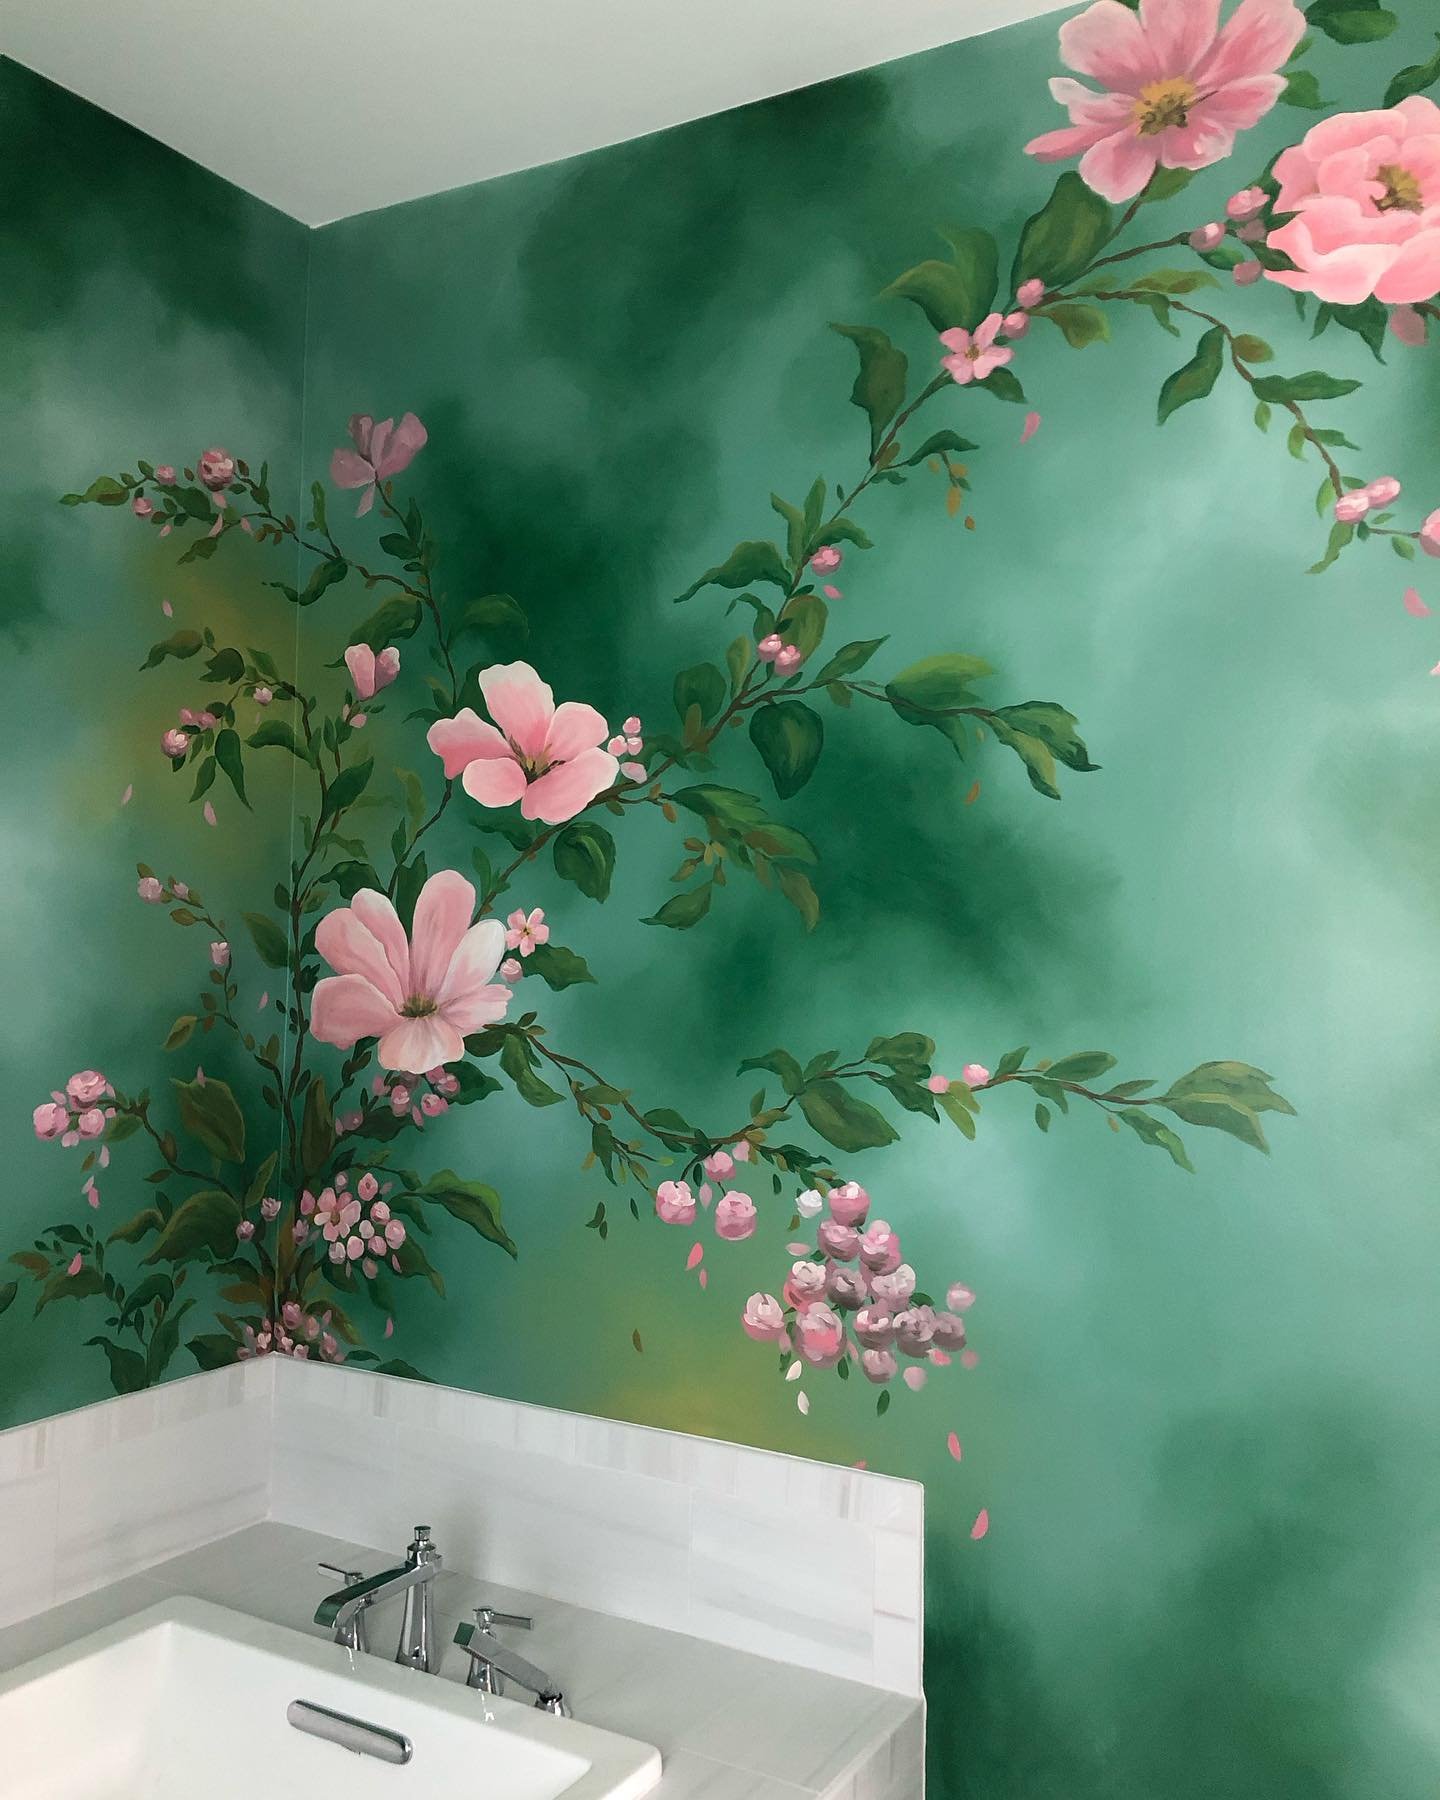 🌸🛁🌿
Just finished this show-stopper master bath space today for a residential client in Ortega, Jax. Yesterday I base coated the room and applied a faux patina finish. Today I painted the leaves and flowers. Can&rsquo;t wait to start their powder 